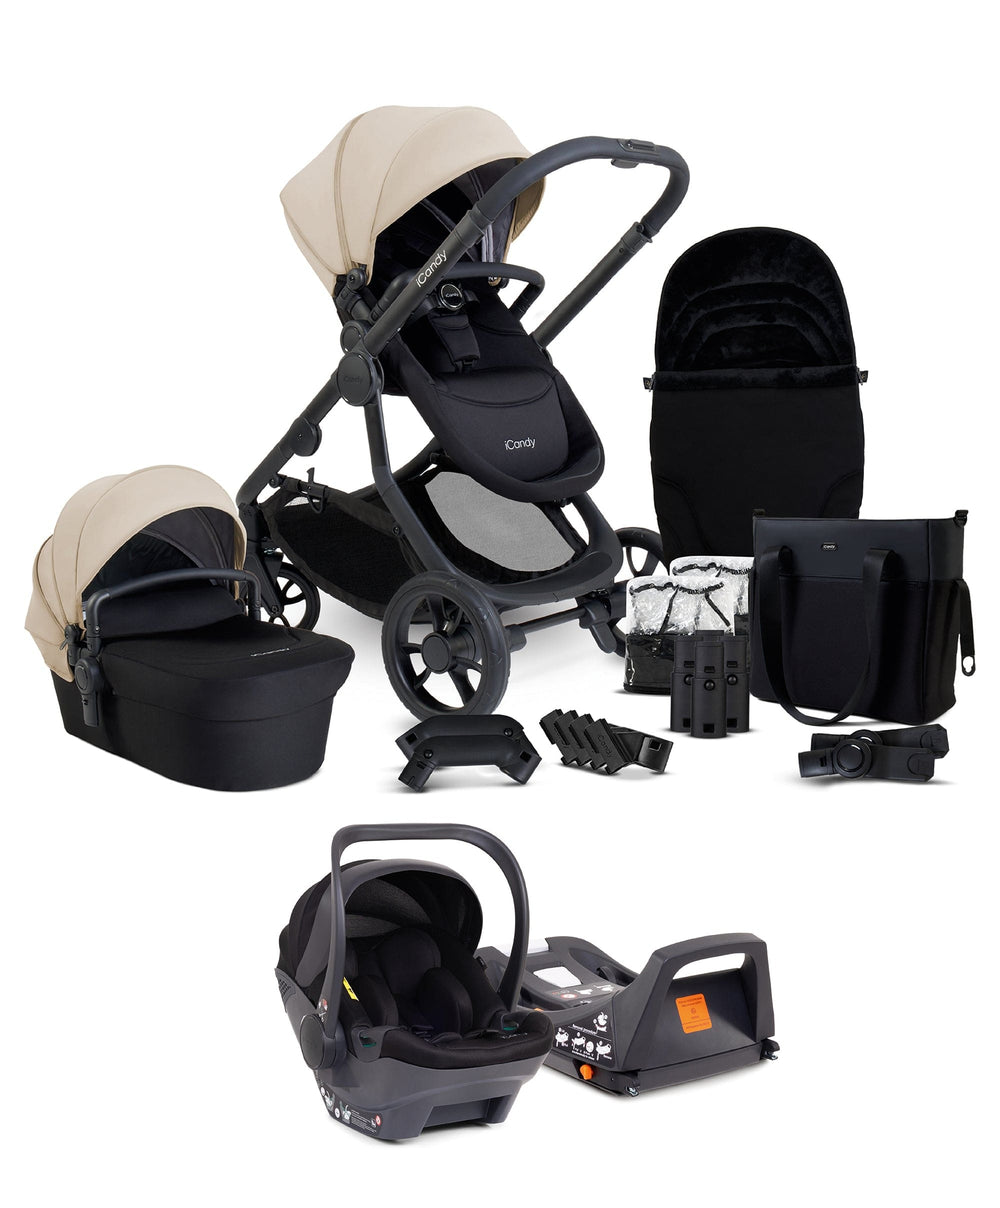 iCandy Pushchairs iCandy Orange4 Pushchair Bundle with iCandy Cocoon Car Seat & Base - Latte